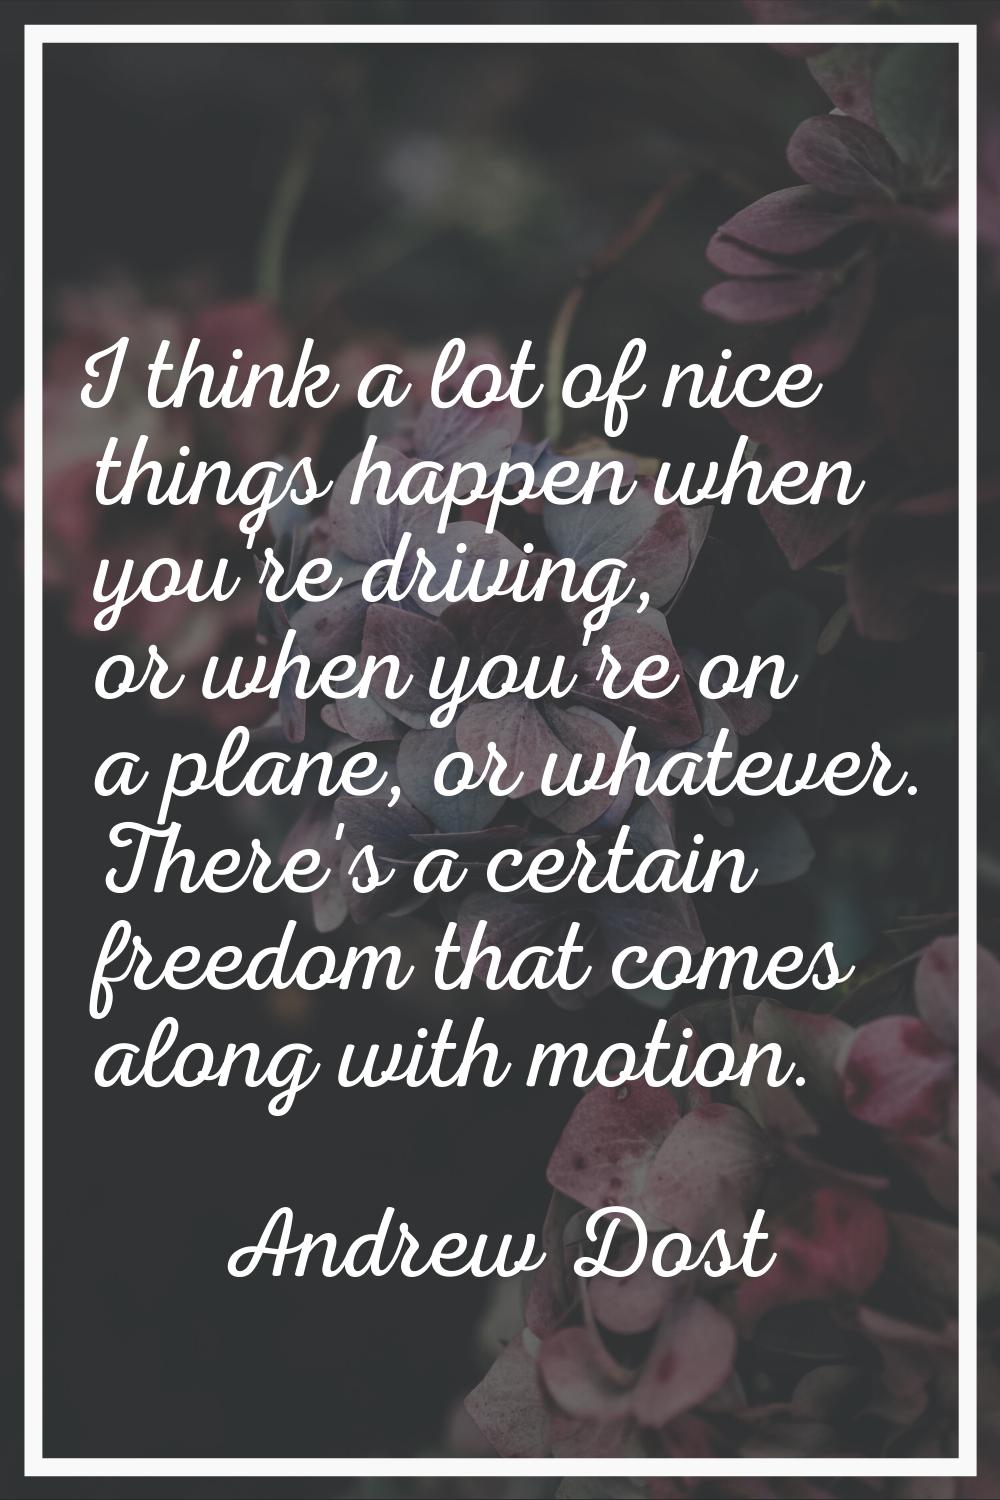 I think a lot of nice things happen when you're driving, or when you're on a plane, or whatever. Th